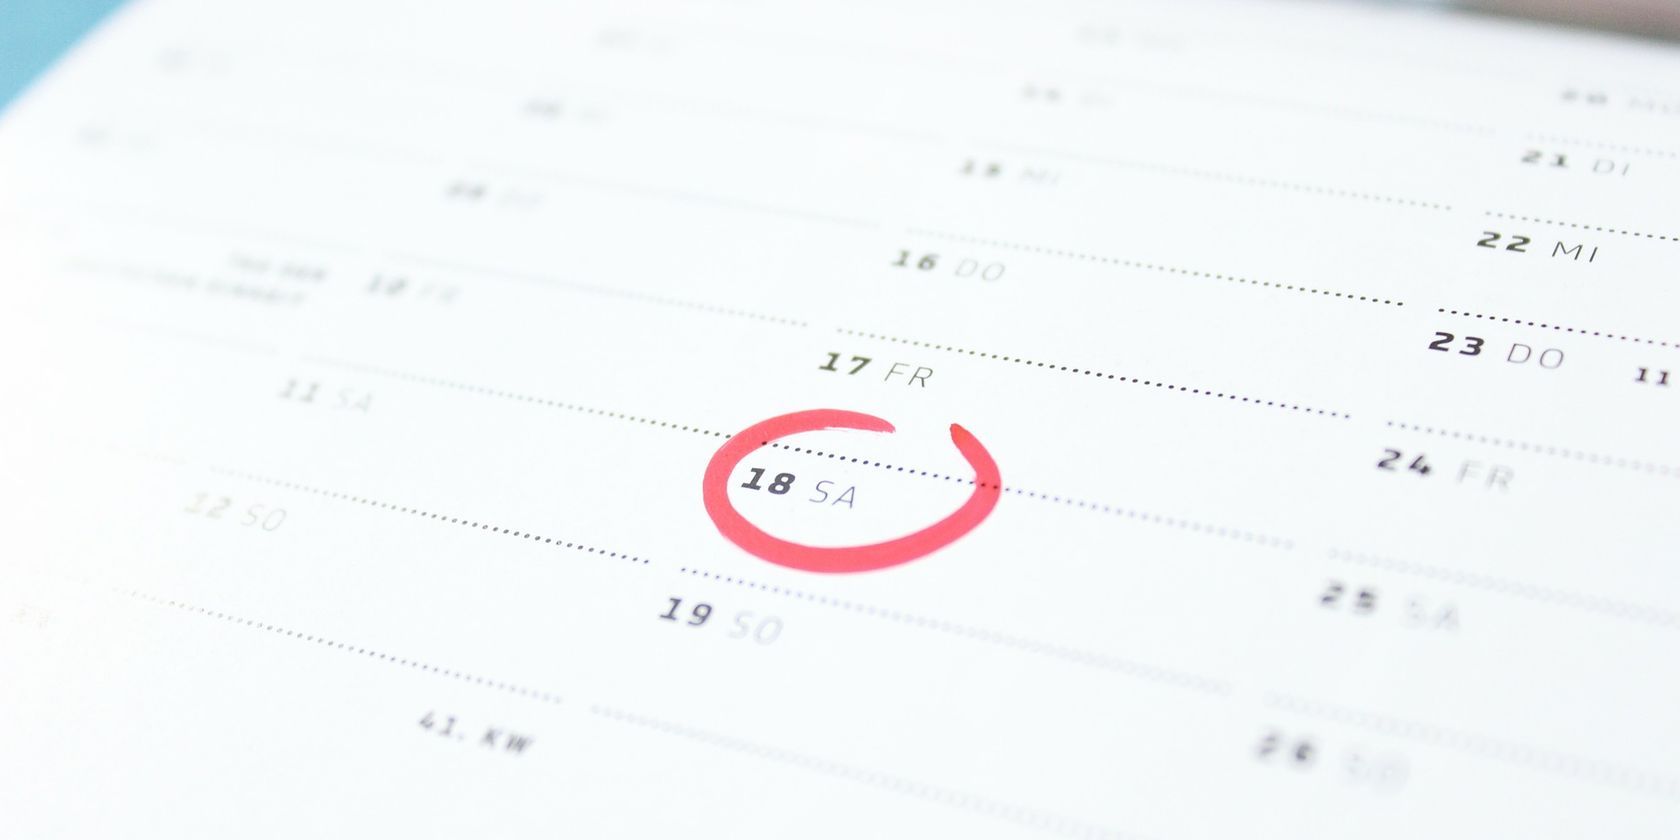 An image of a calendar with a circle marked on it